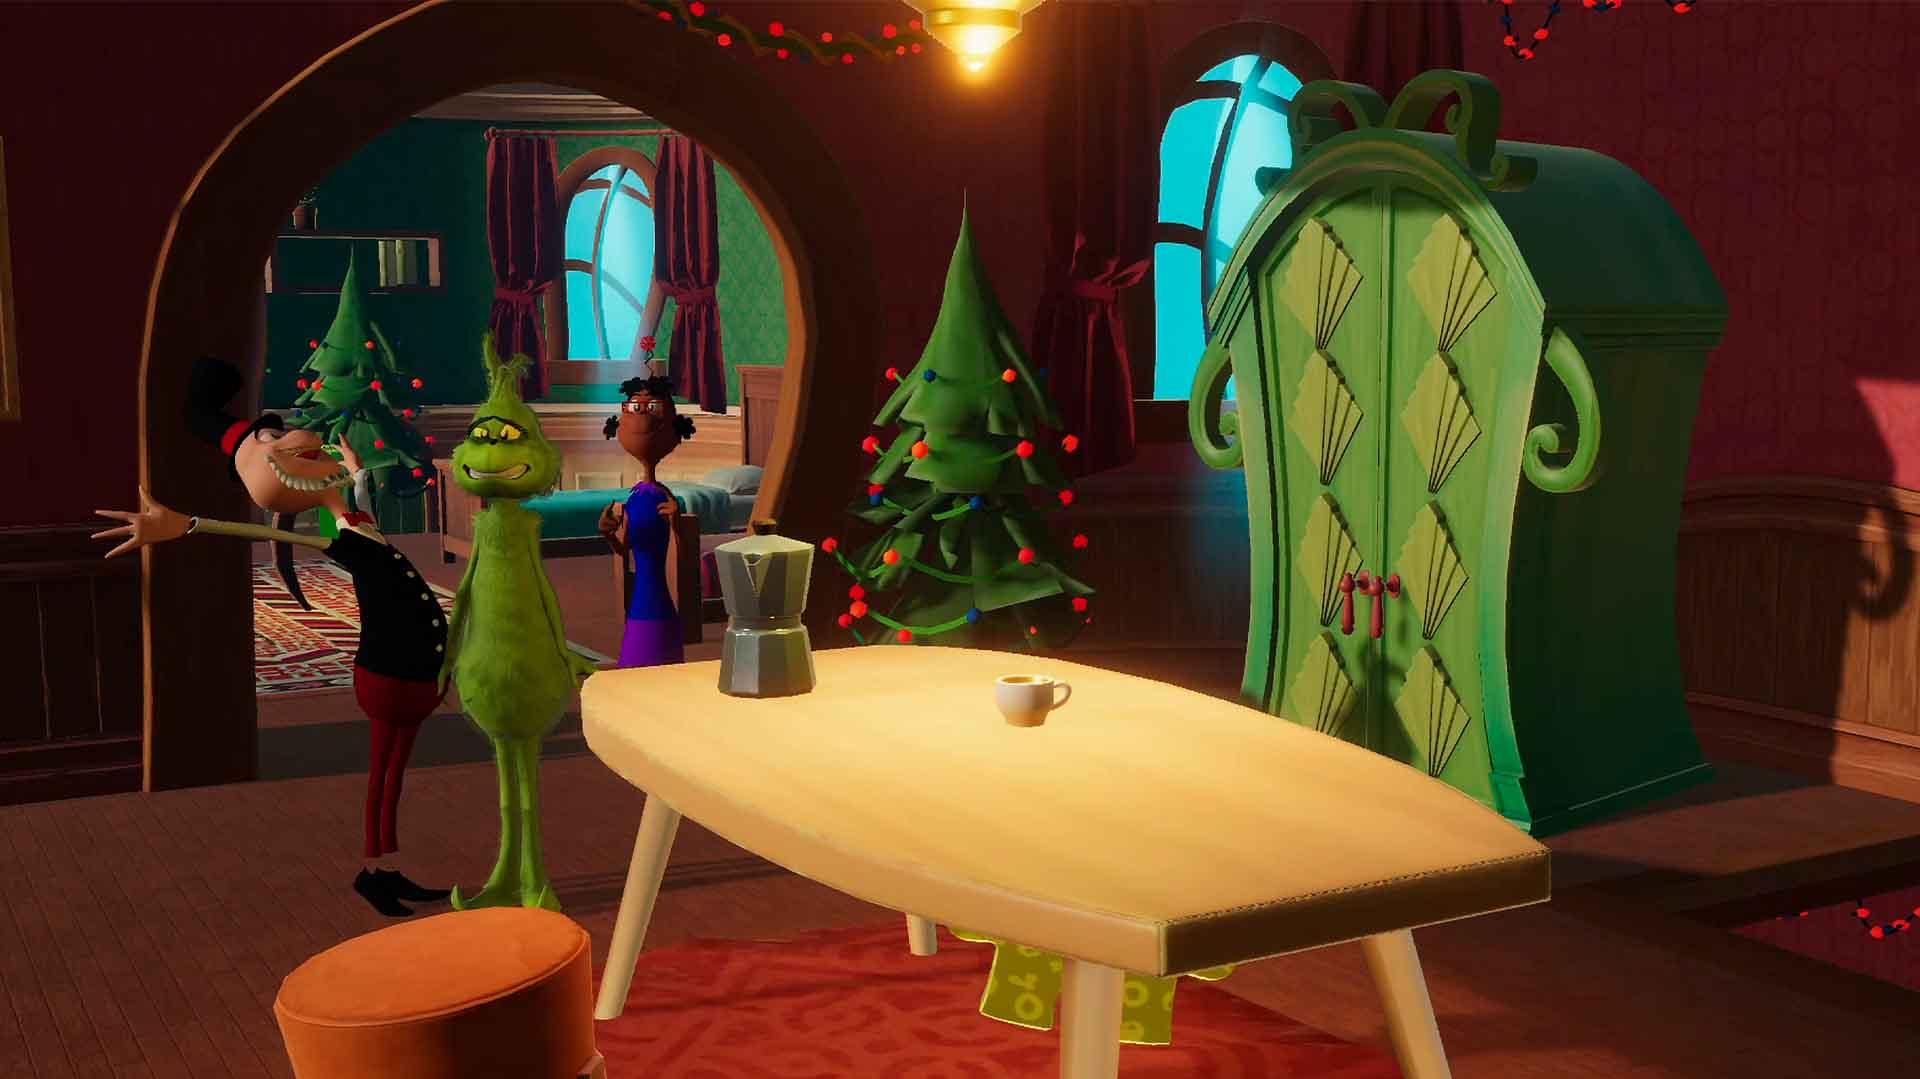 The Grinch Christmas Adventures launches today for PC and